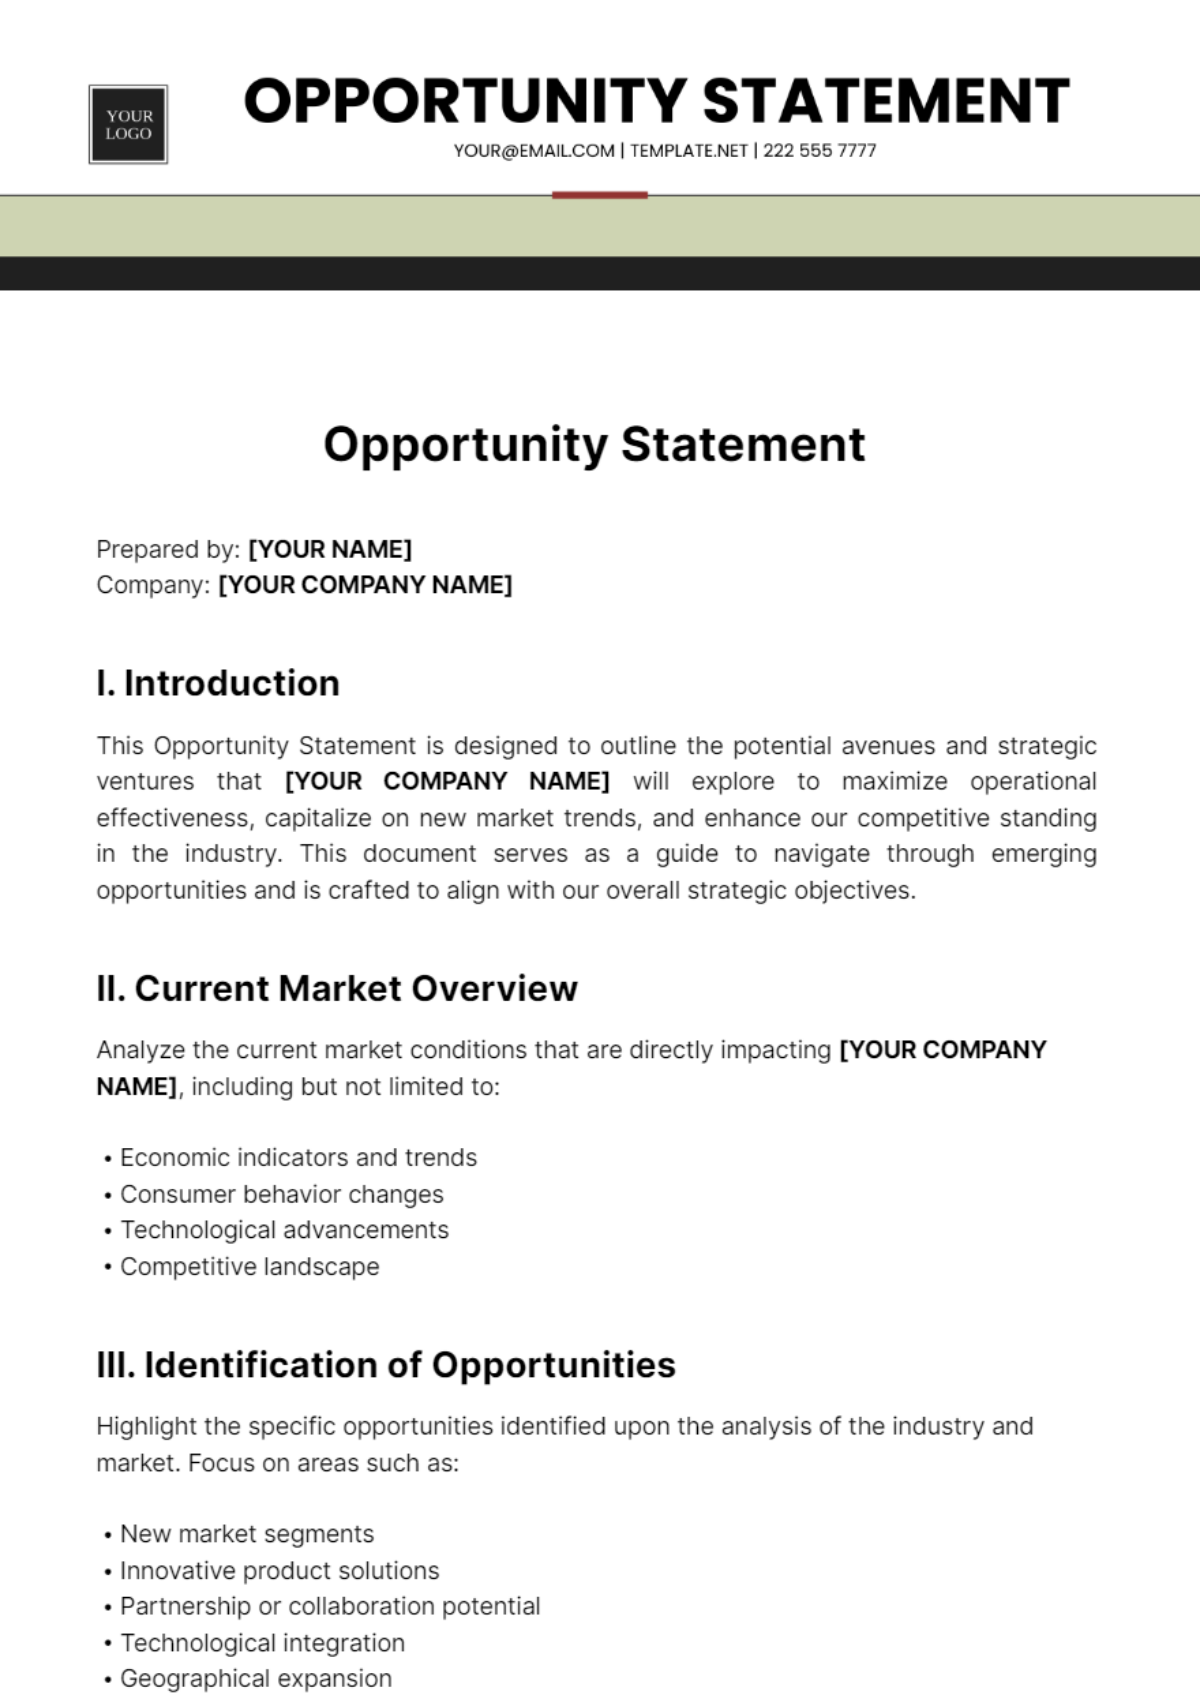 Opportunity Statement Template